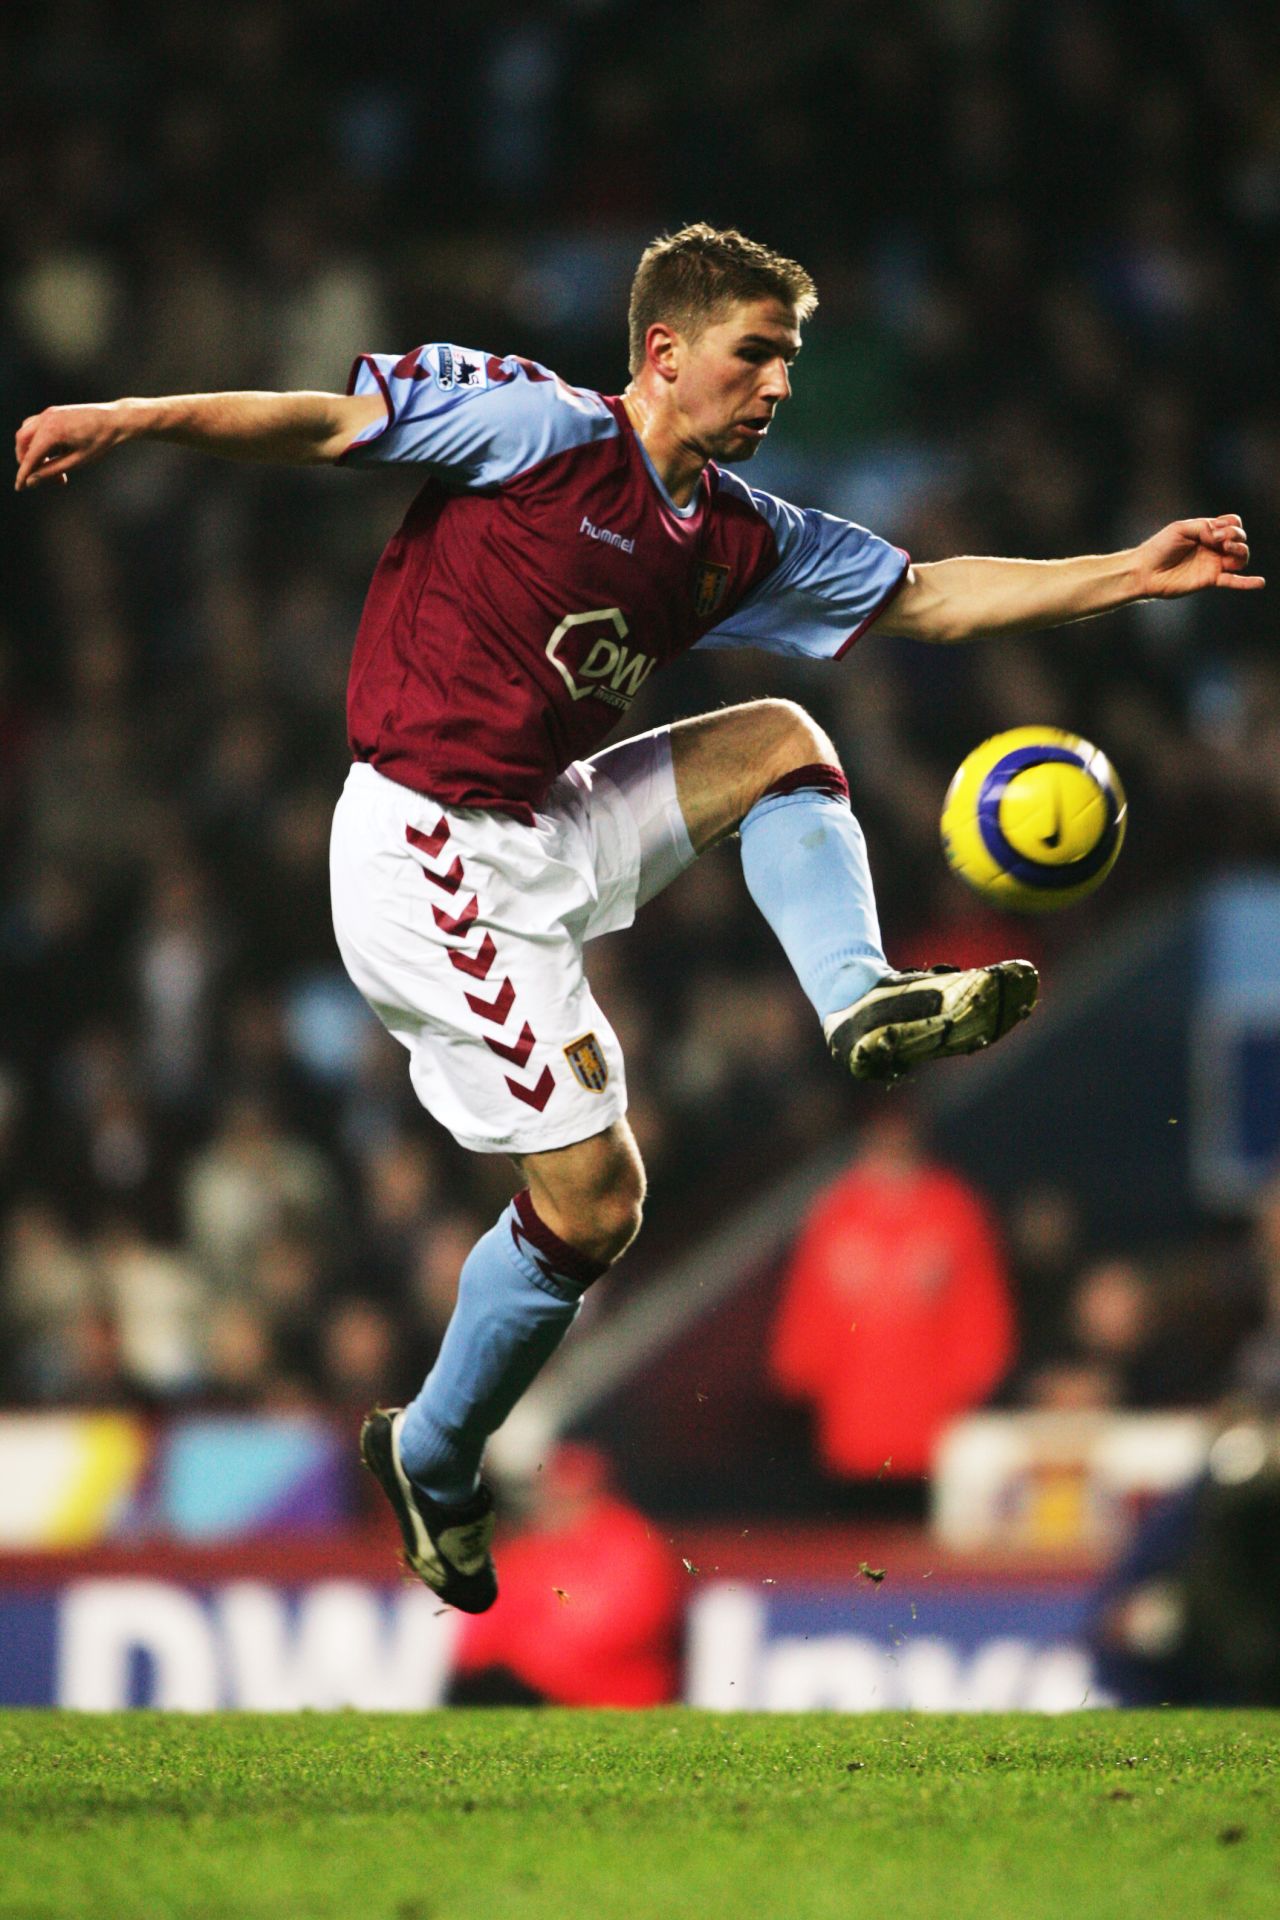 Hitzlsperger moved to England as an 18-year-old in August 2000, joining Aston Villa from Bayern Munich's youth set-up.